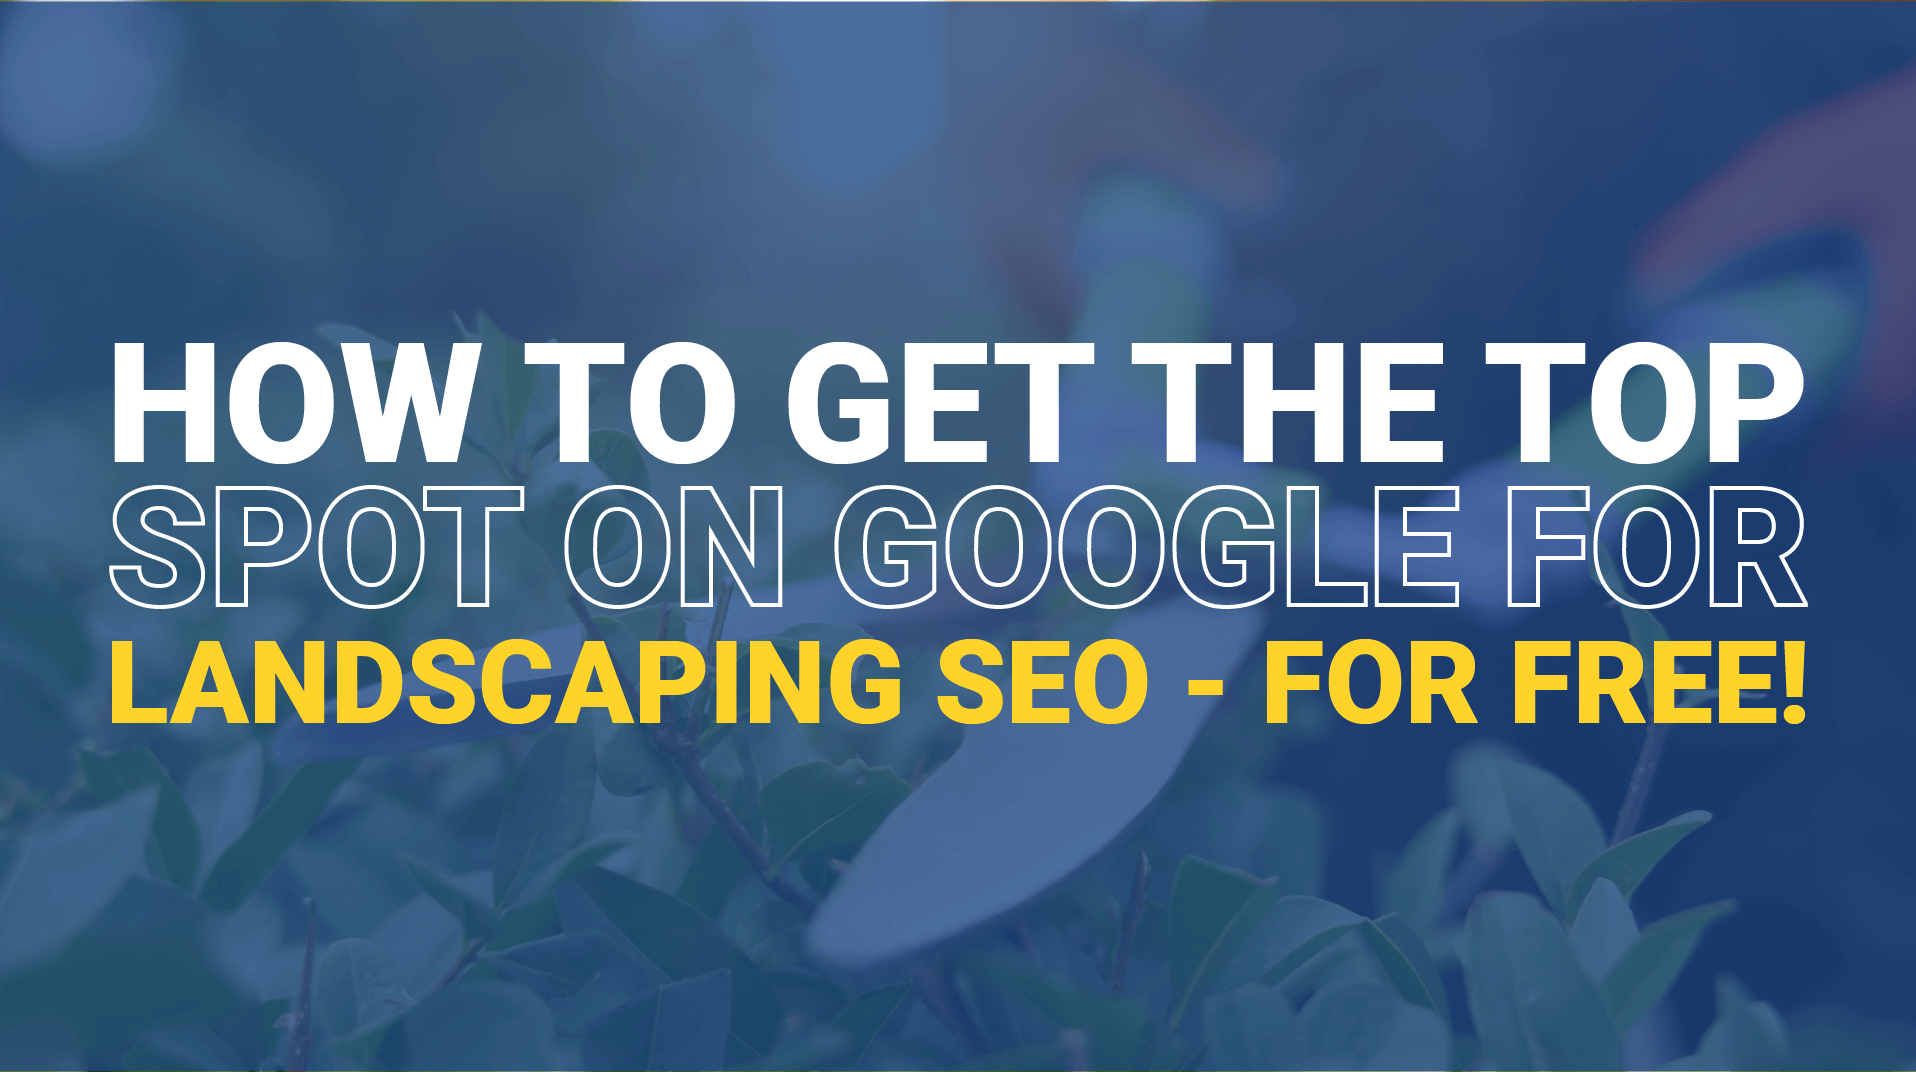 How to Get the Top Spot on Google for Landscaping Company